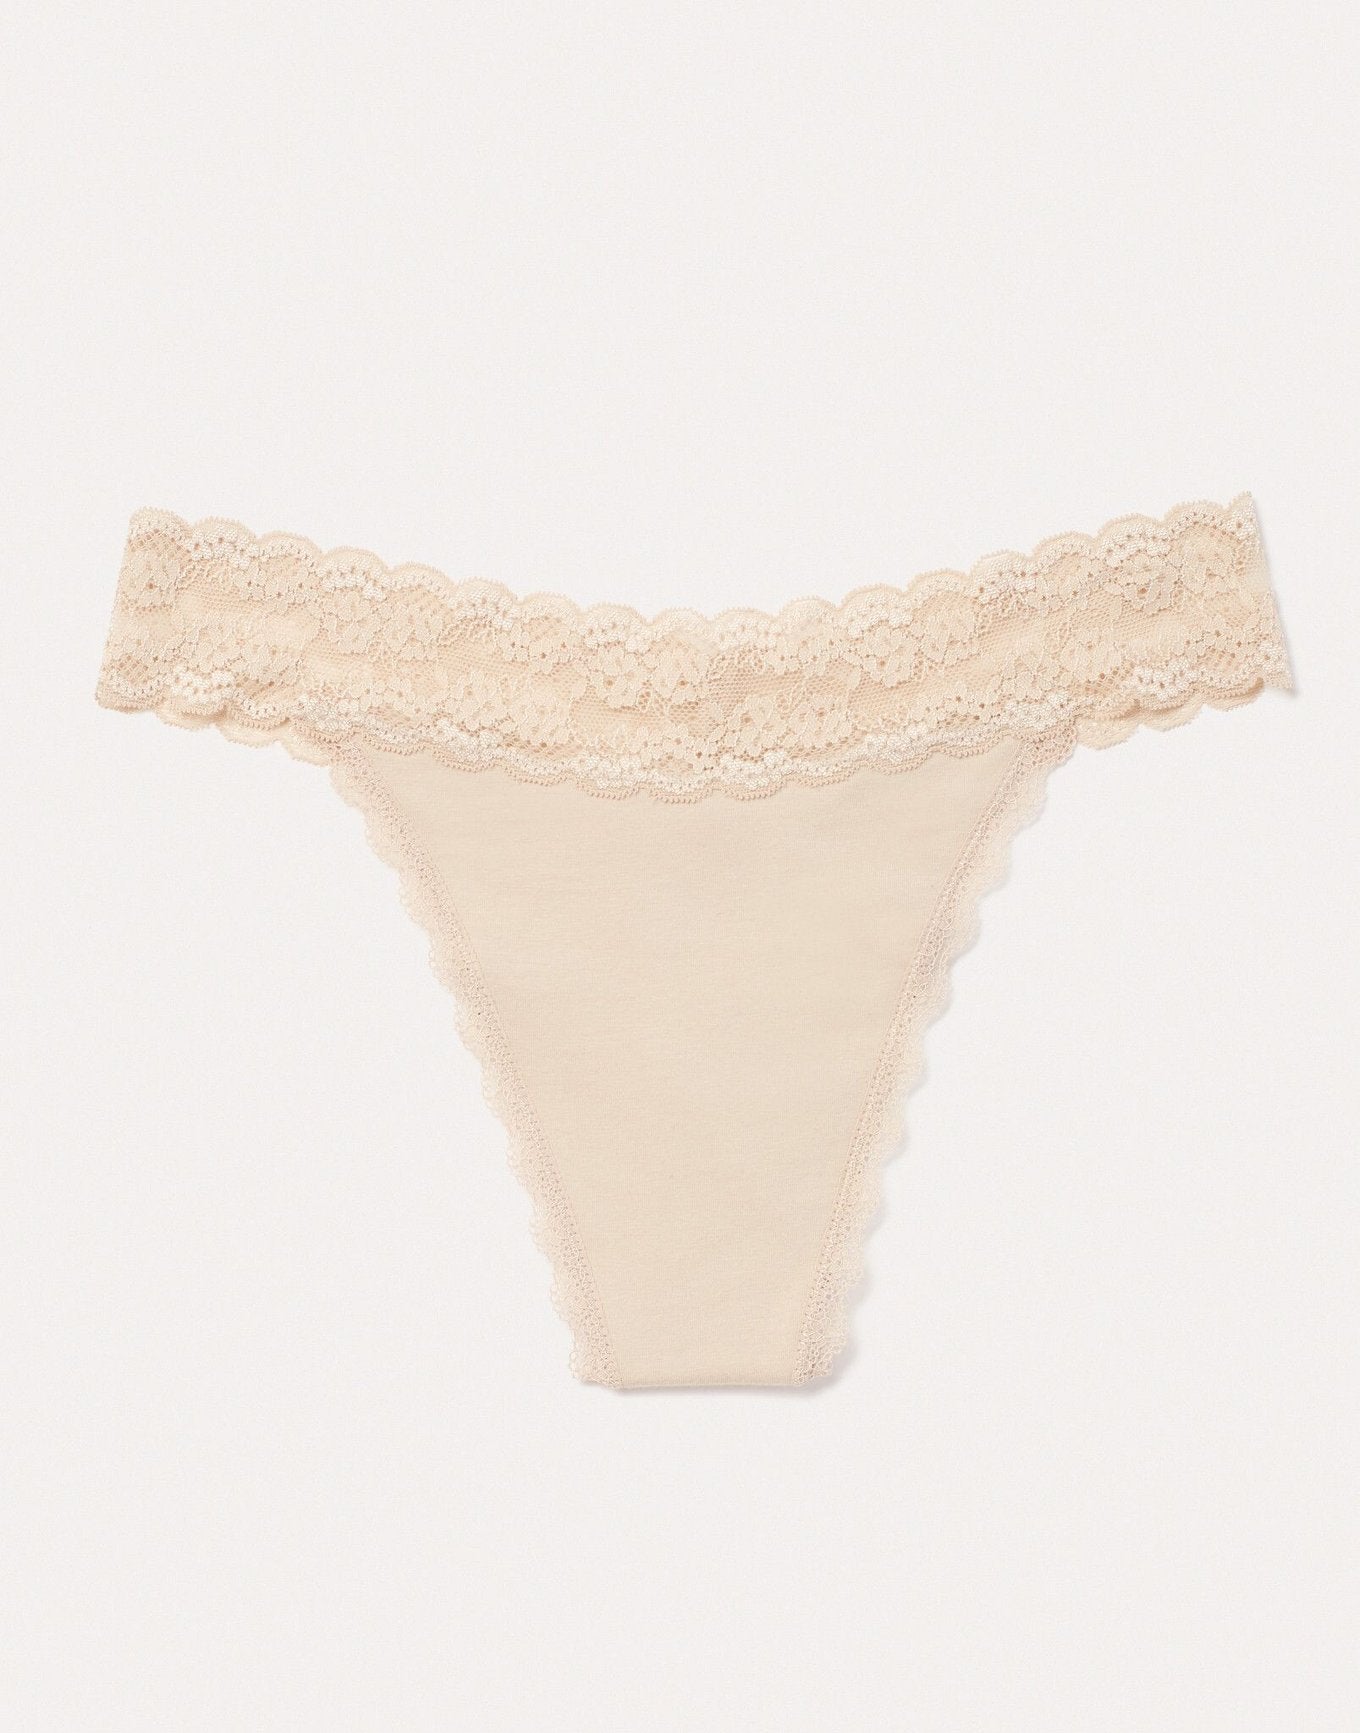 Joyja Lily period-proof panty in color Strut The Street and shape thong